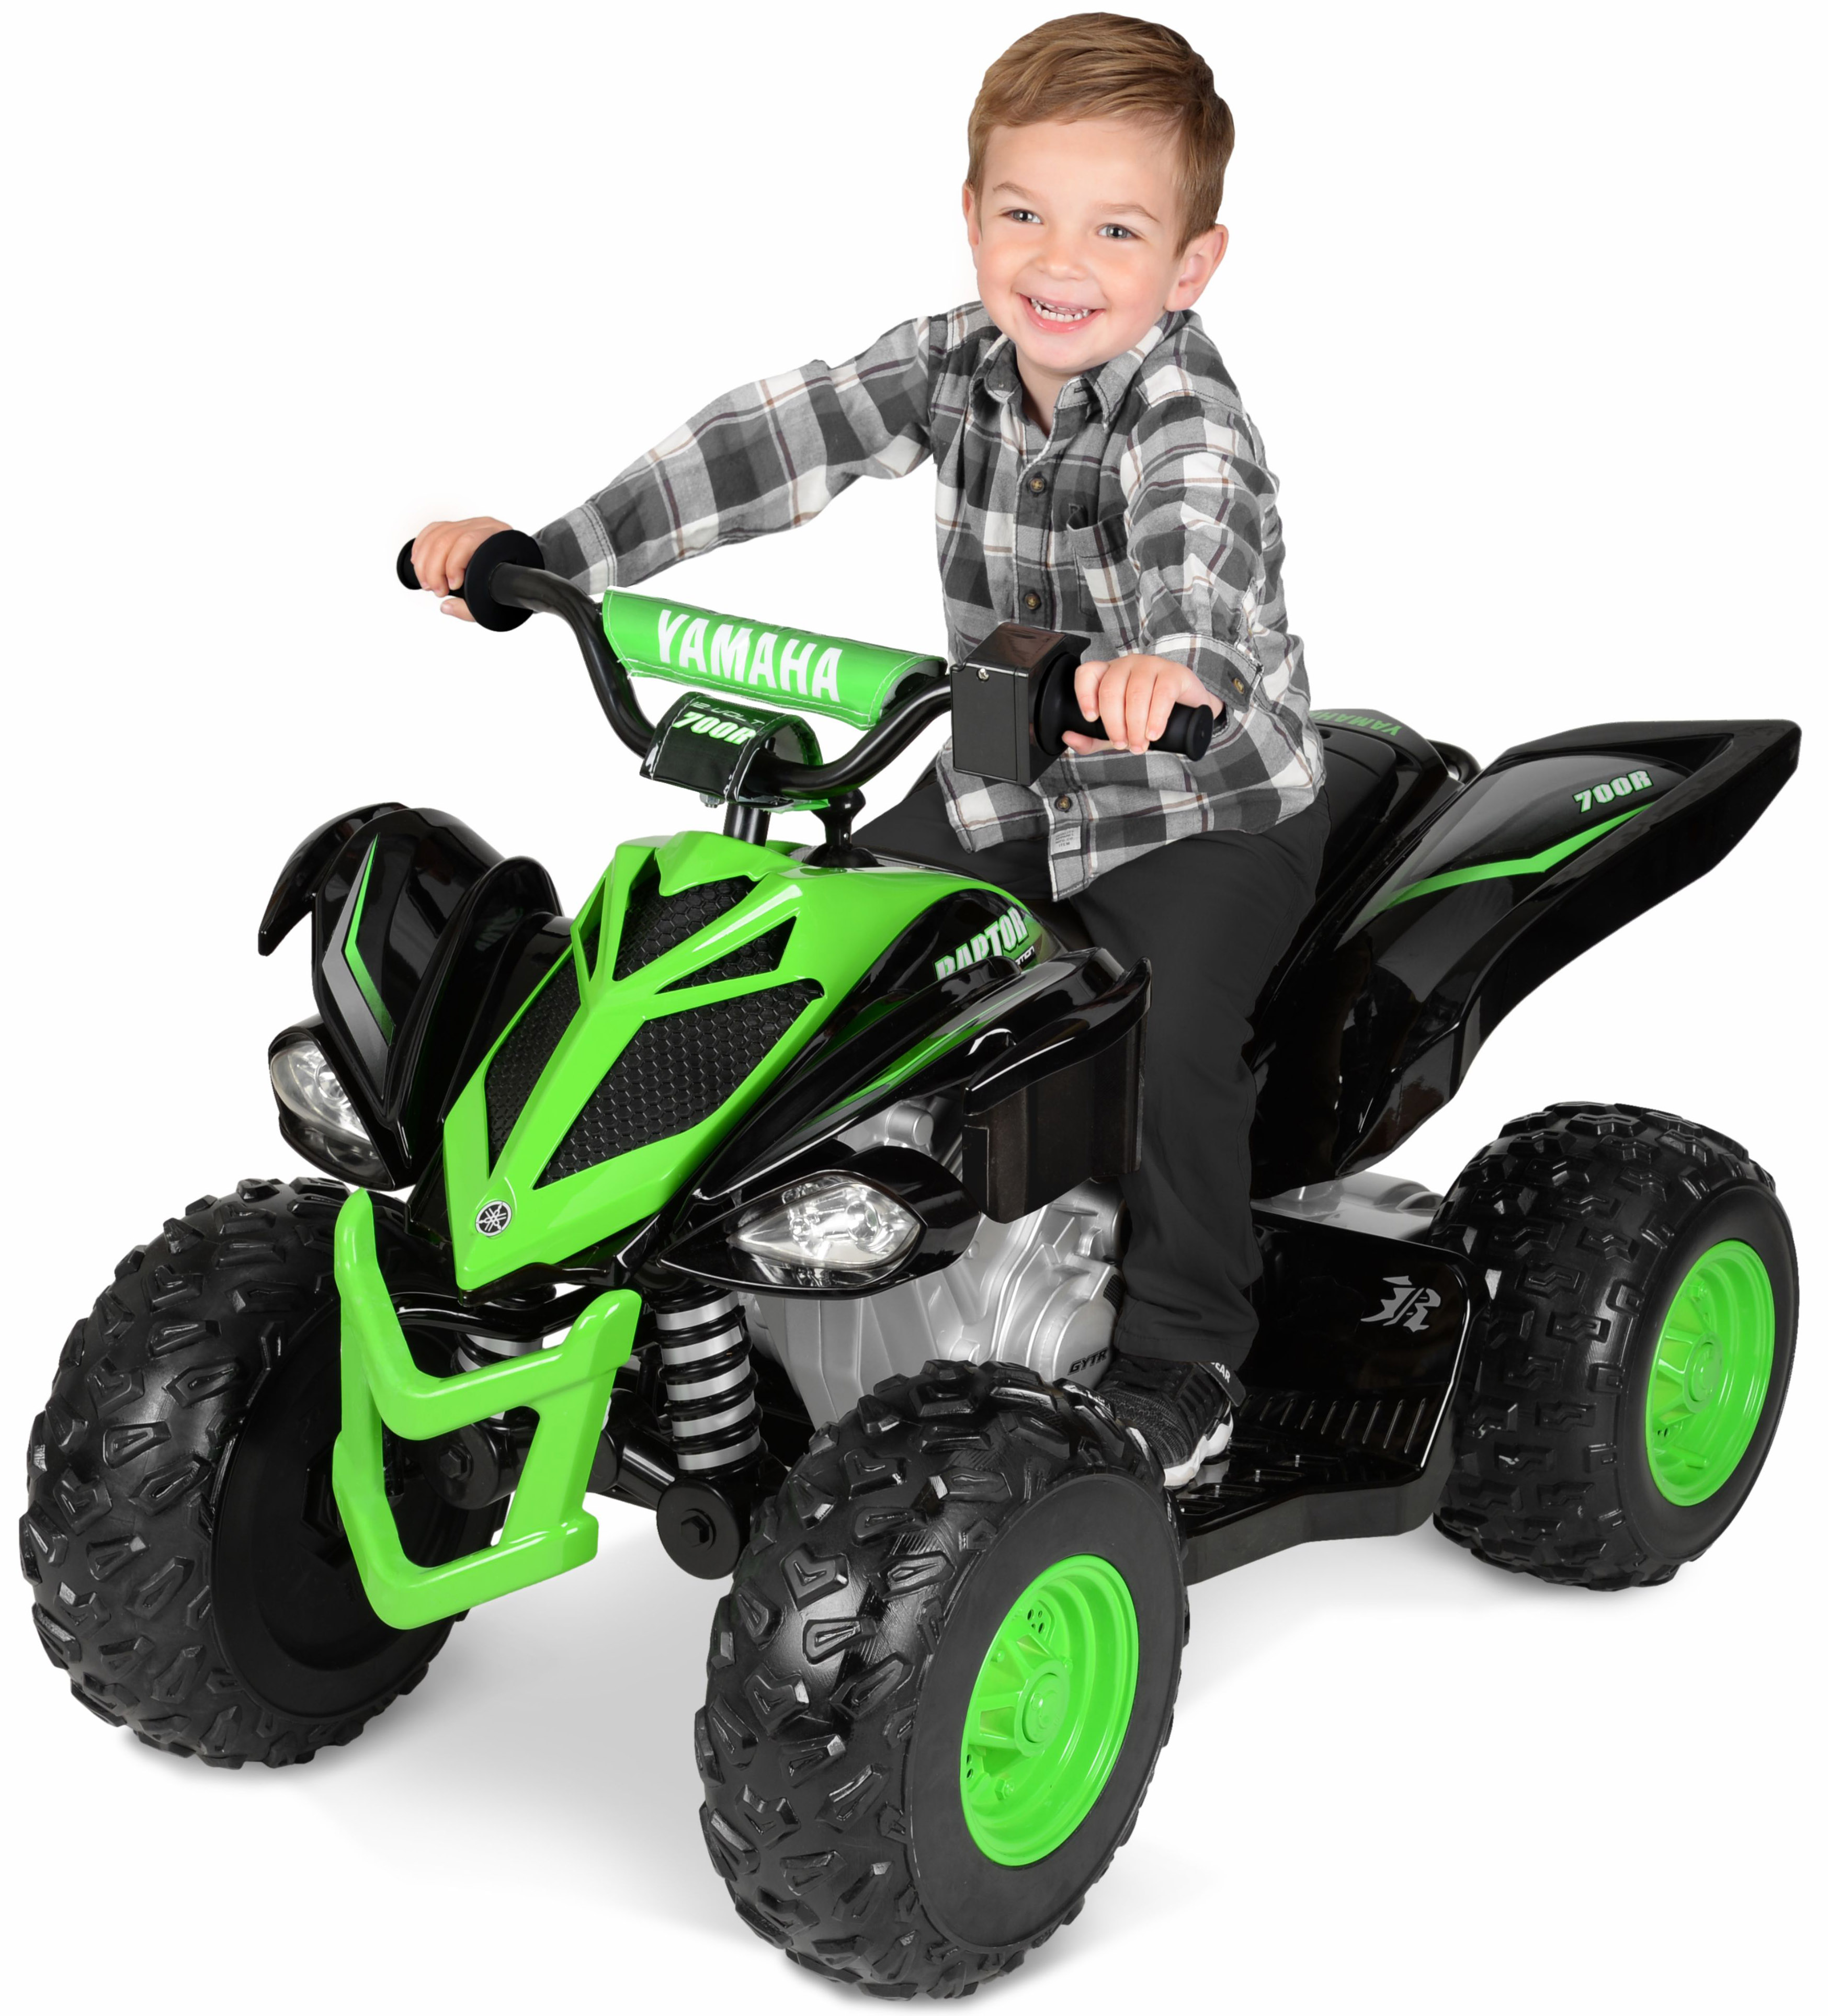 Yamaha 12 Volt Raptor Battery Powered Ride-On - New Custom Graphic Design - for Boys & Girls Ages 3 and up - image 1 of 9